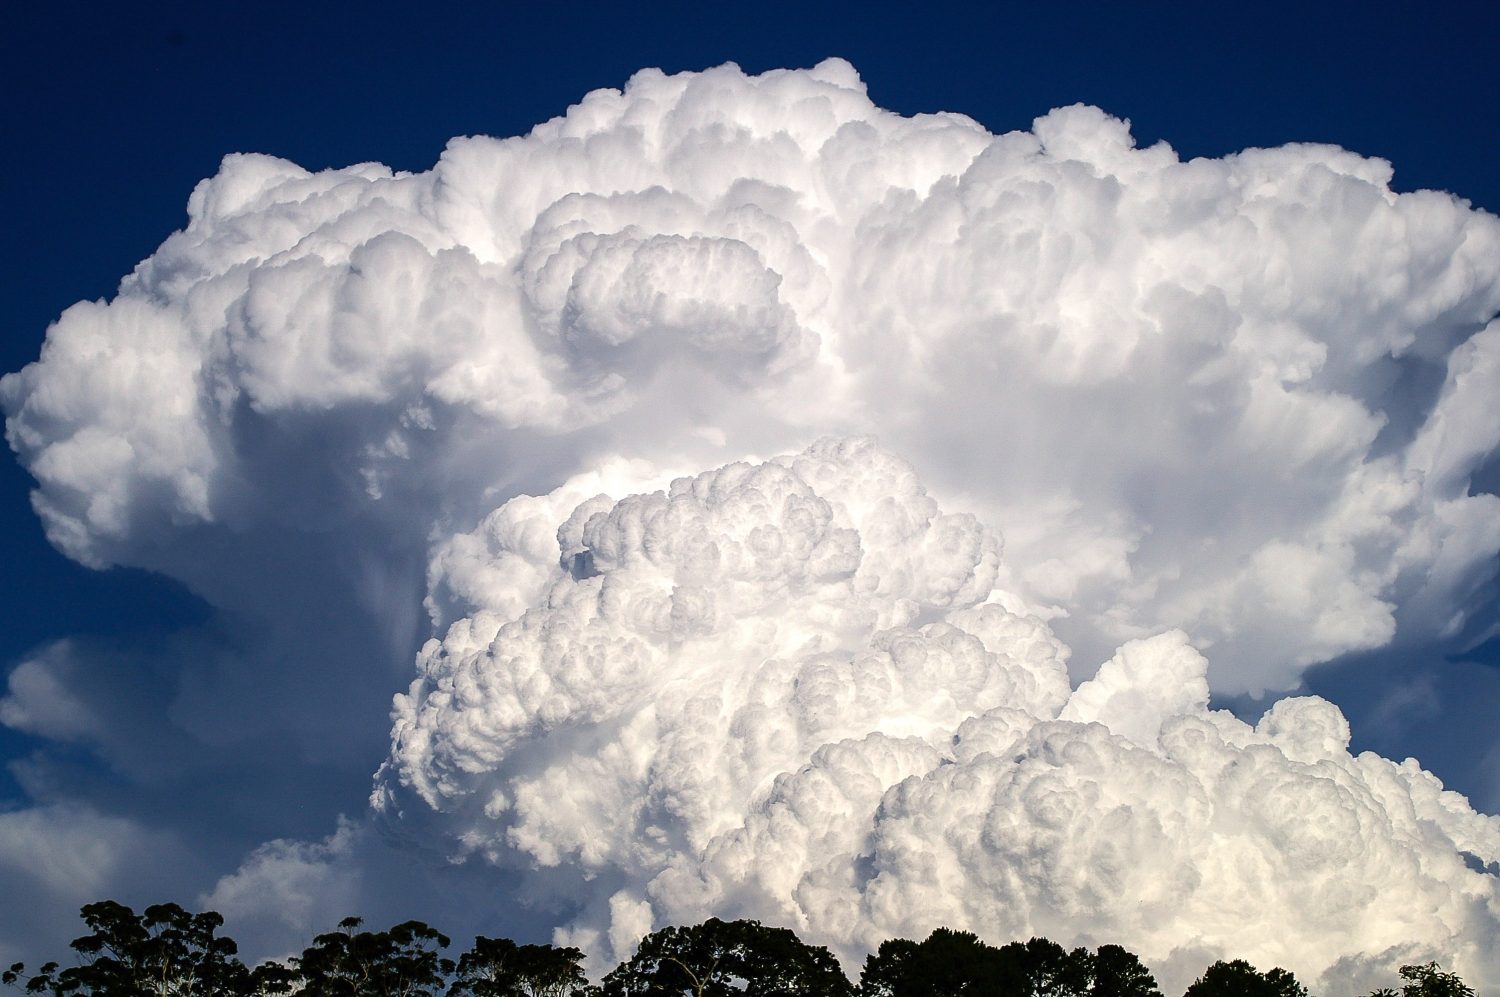 Research brief: Regional climate models capture changes to extreme storms